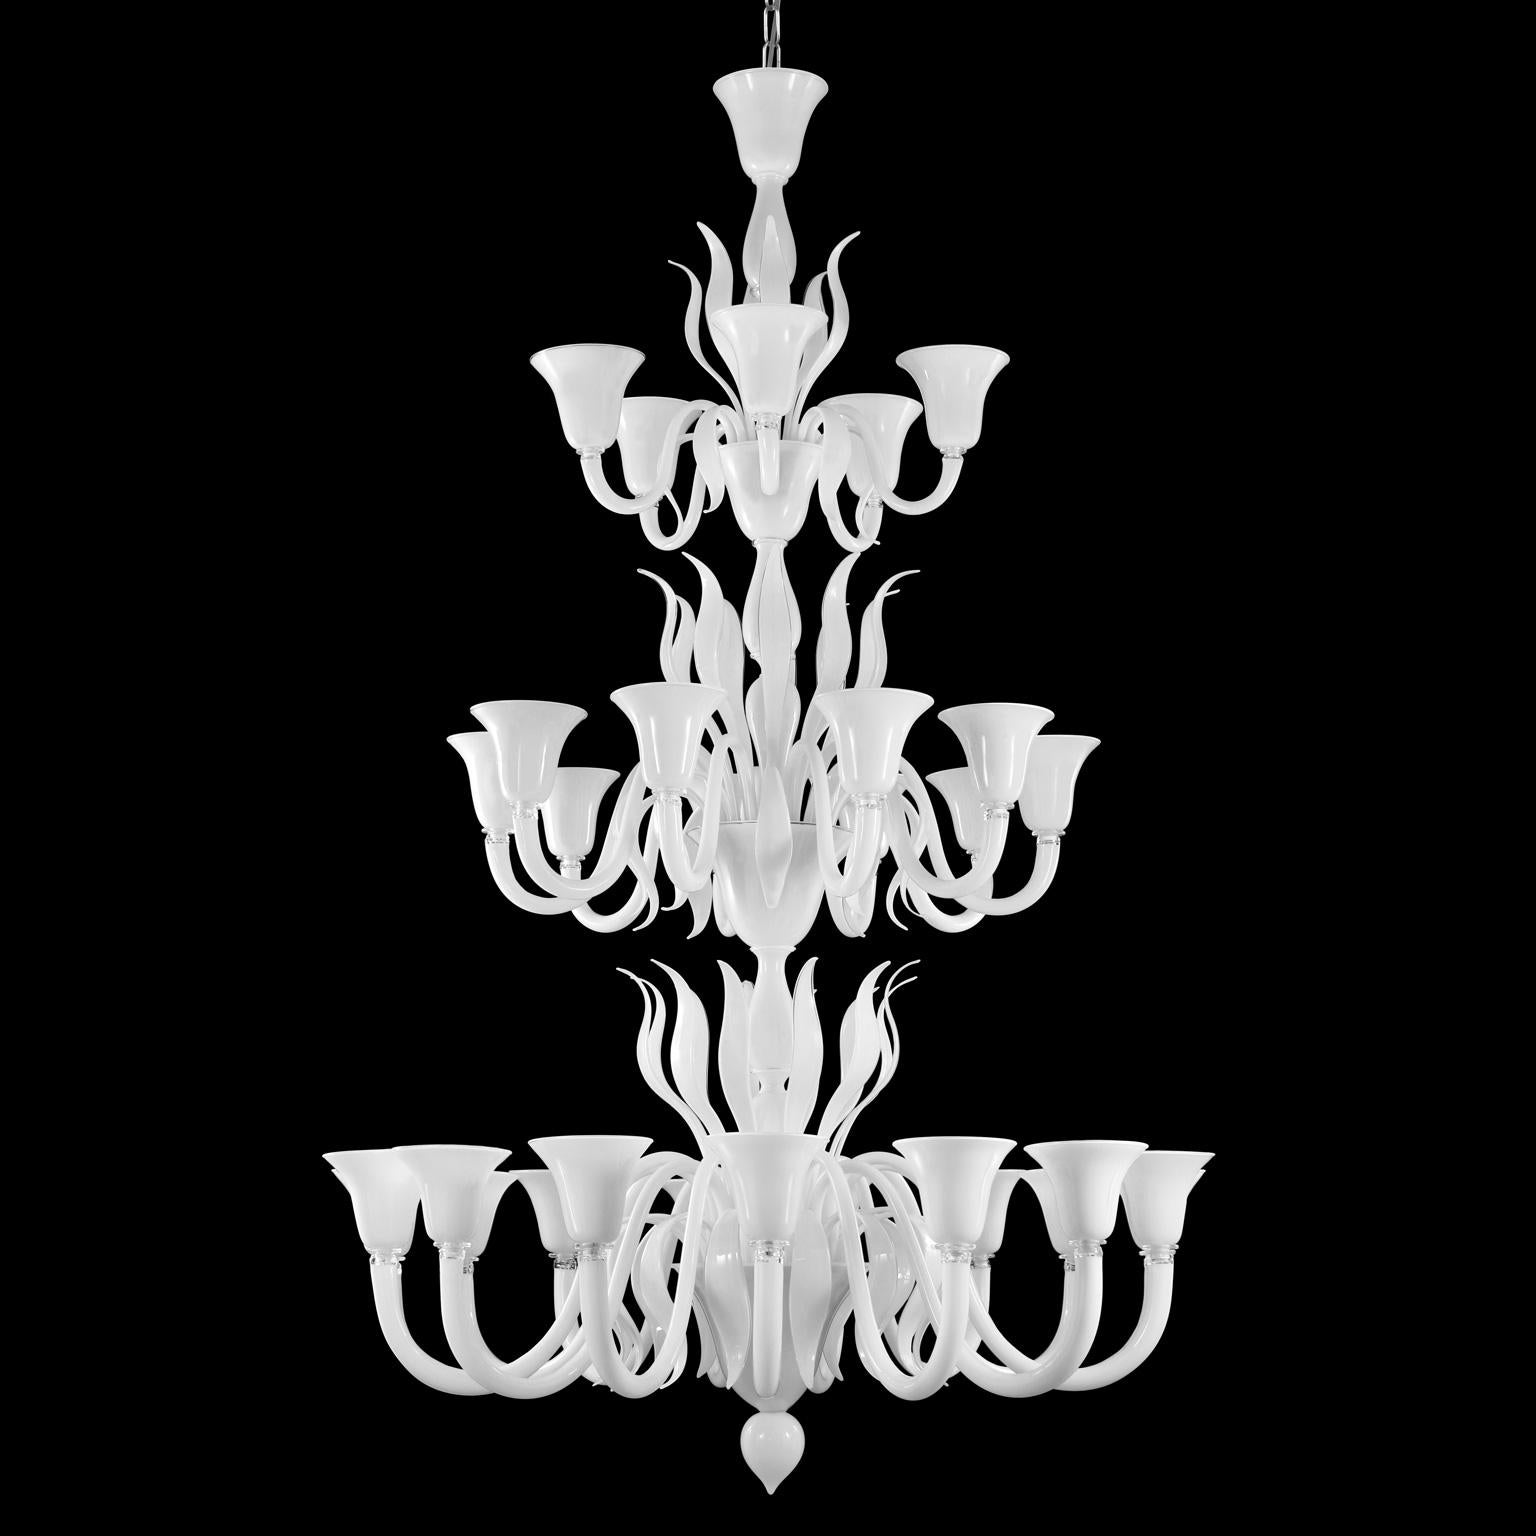 The collection of Murano glass chandeliers Swing 275 is one of our collections that most differs from the Classic Murano tradition: the design of this collection is closer to the natural shapes.
The decorative wavy elements that surrounded the